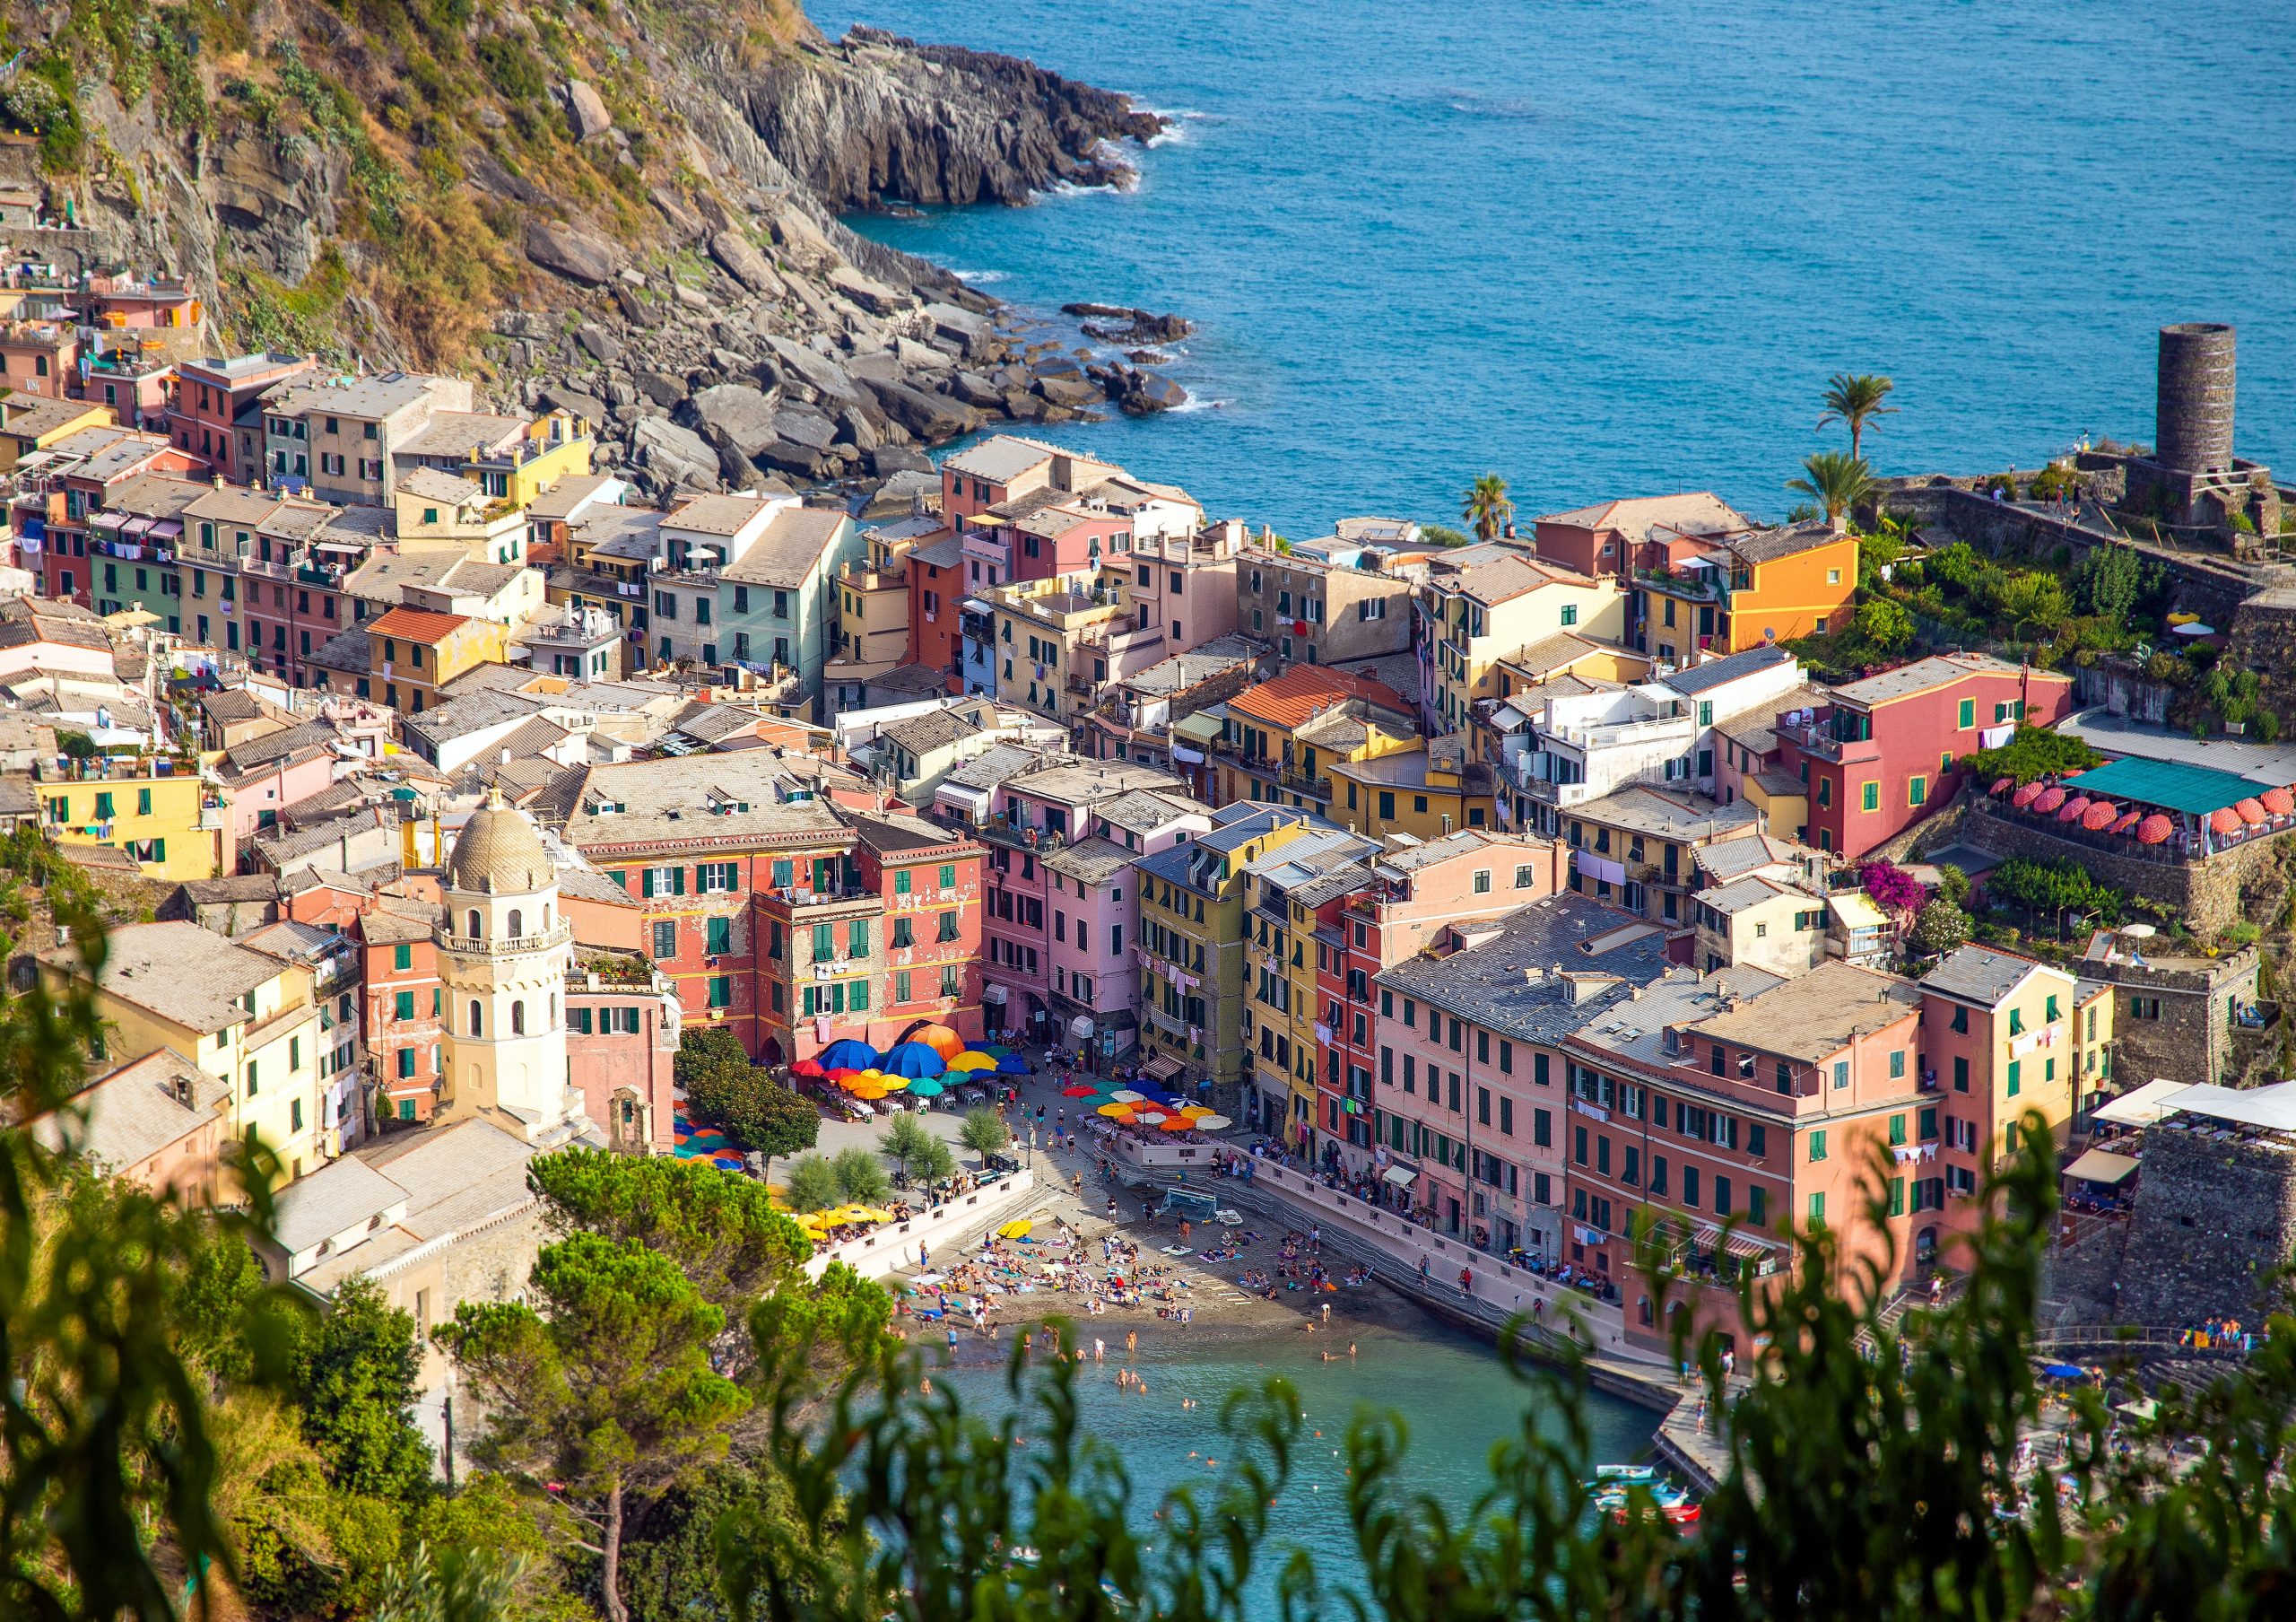 A panoramic view of the little old town Vernazza - 1-Week Itinerary in Cinque Terre